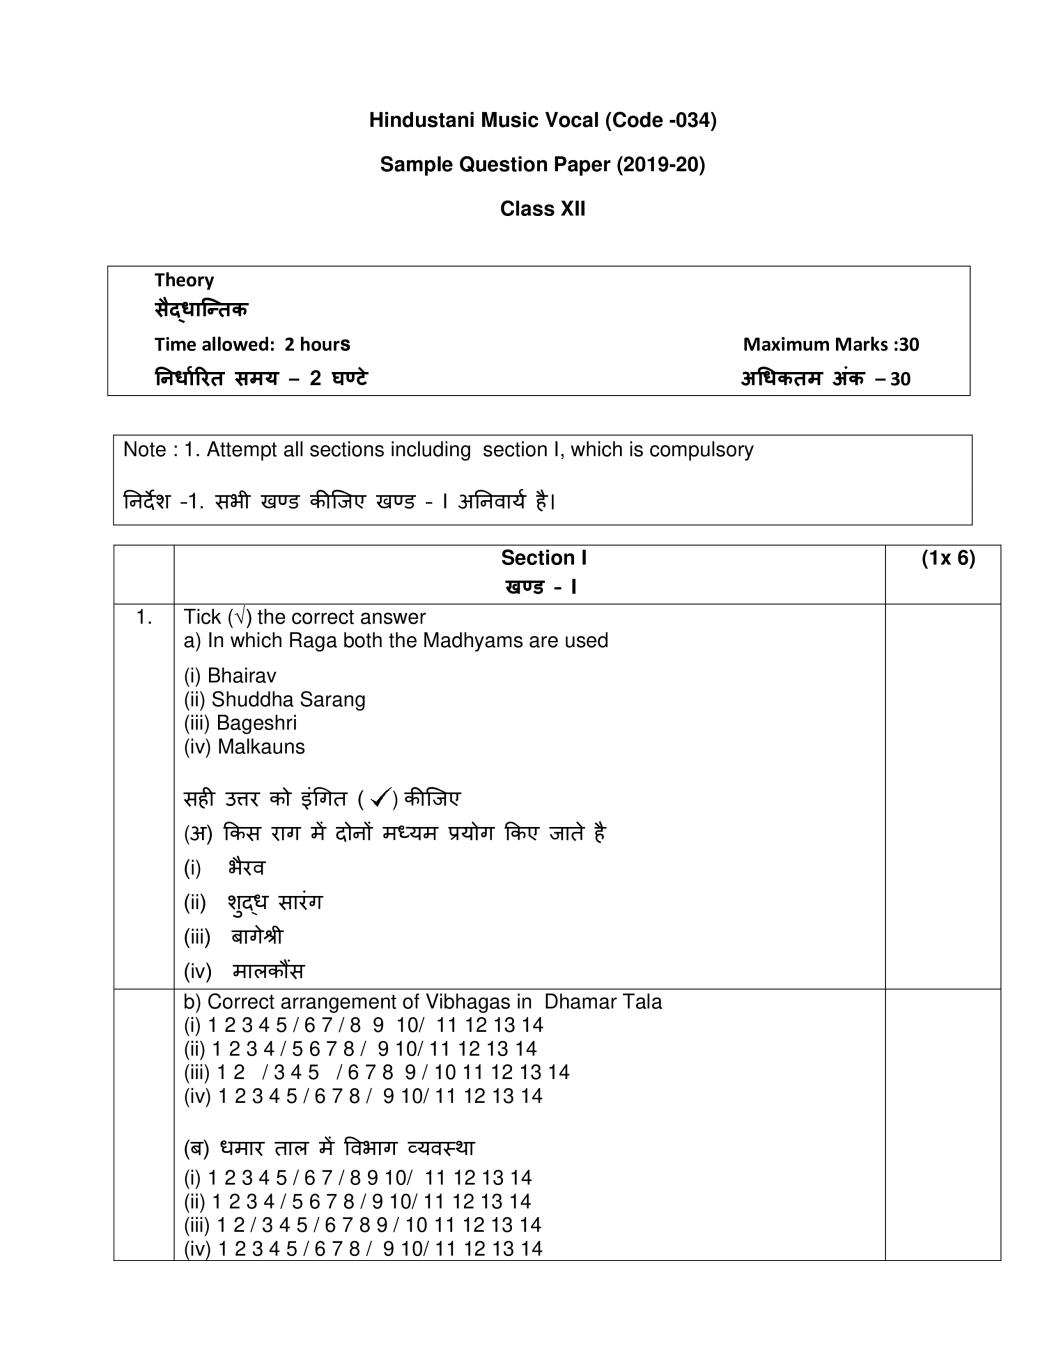 CBSE Class 12 Sample Paper 2020 for Hindustani Music Vocal - Page 1